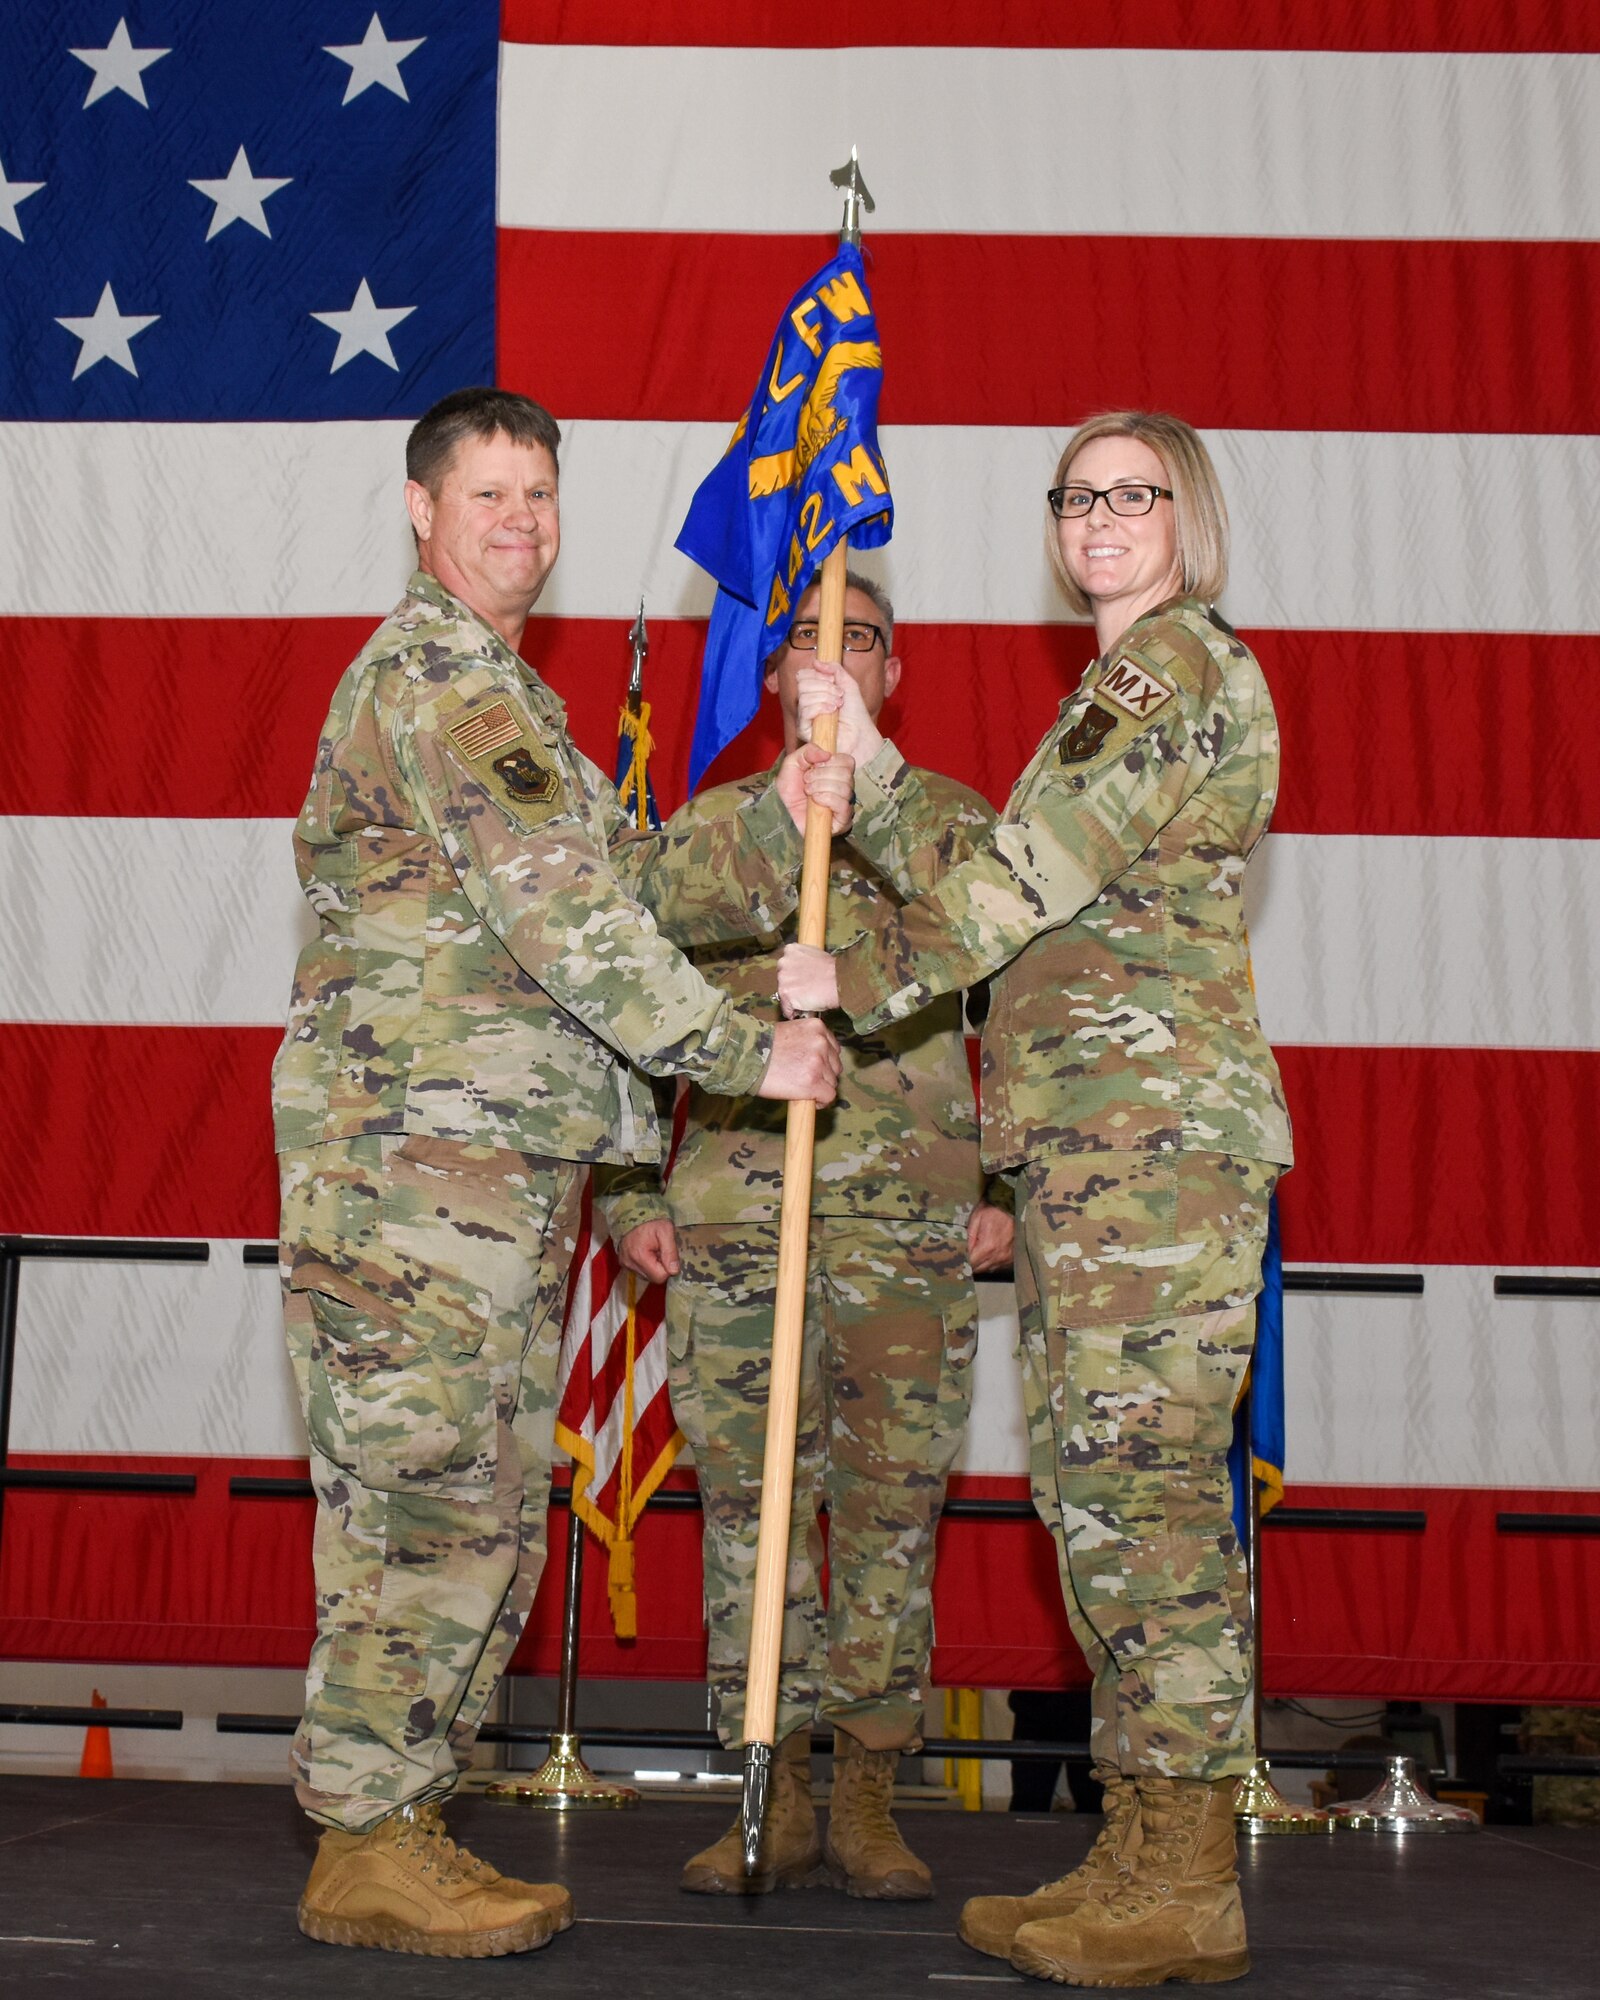 A man on the right hands a blue flag to a woman on the left. Both are wearing operational camouflage pattern fatigues and standing in front of a very large American flag.